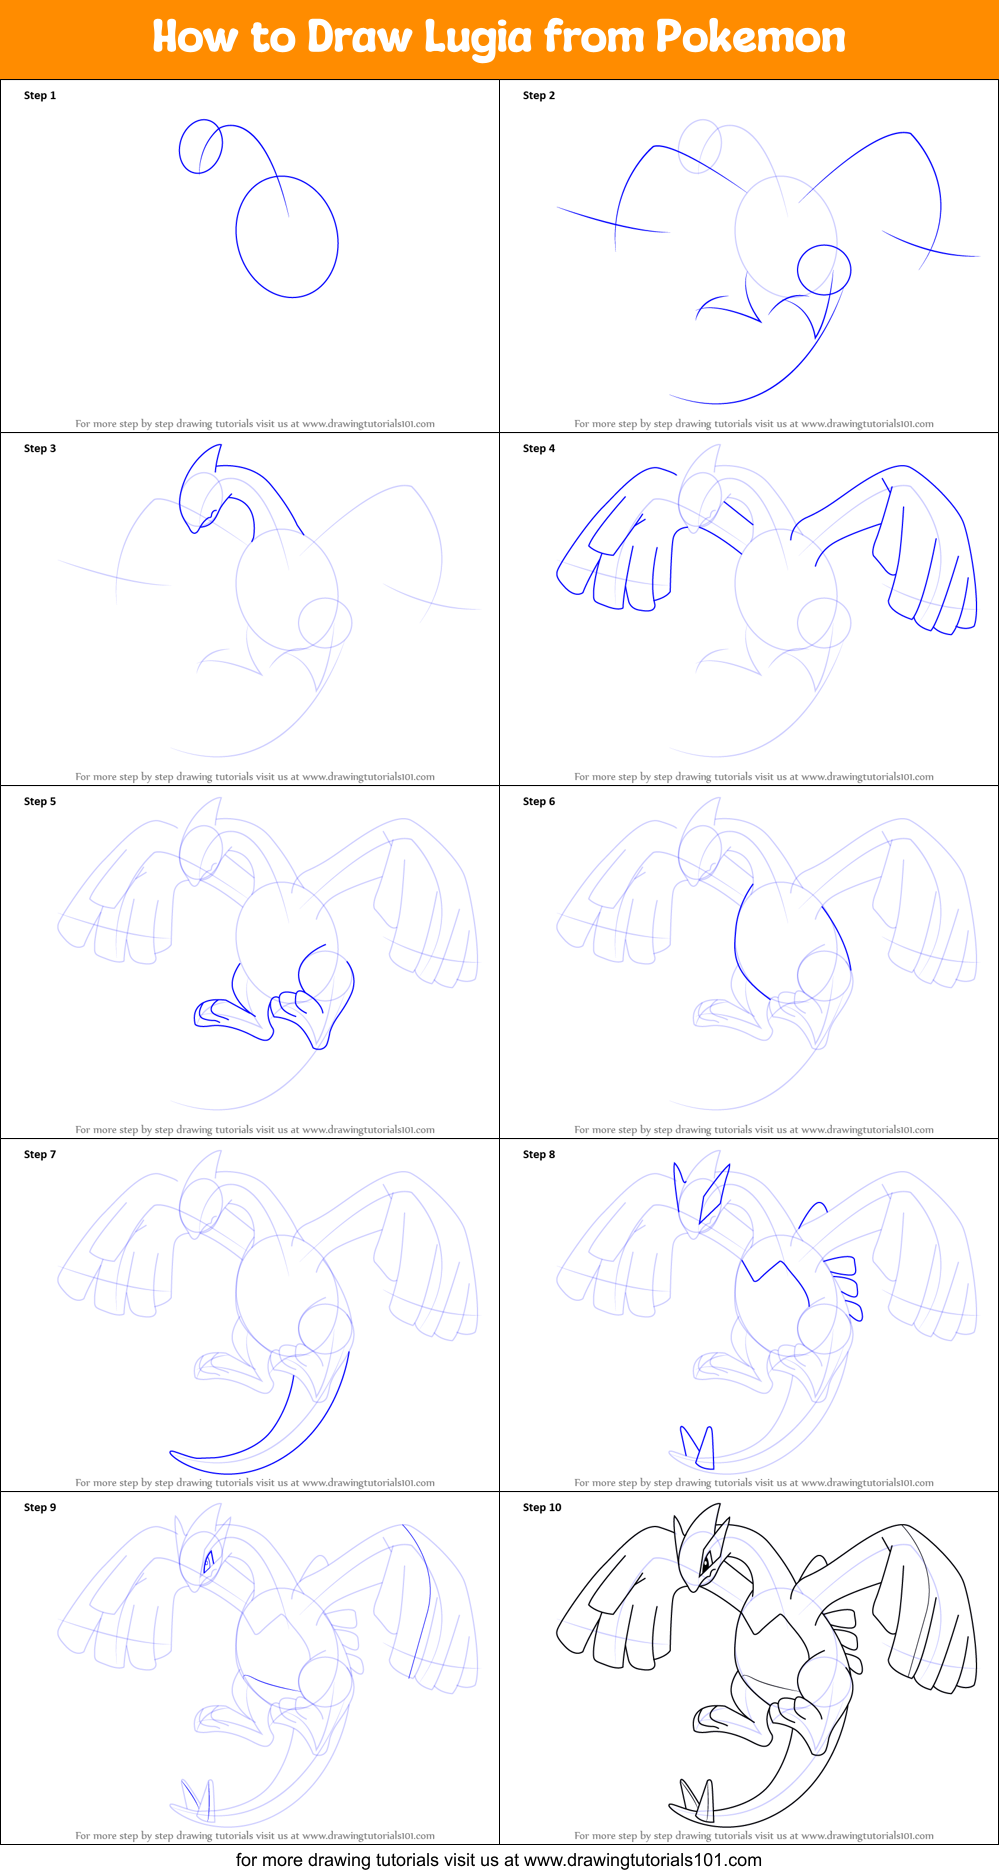 Charizard Drawing - How To Draw Charizard Step By Step